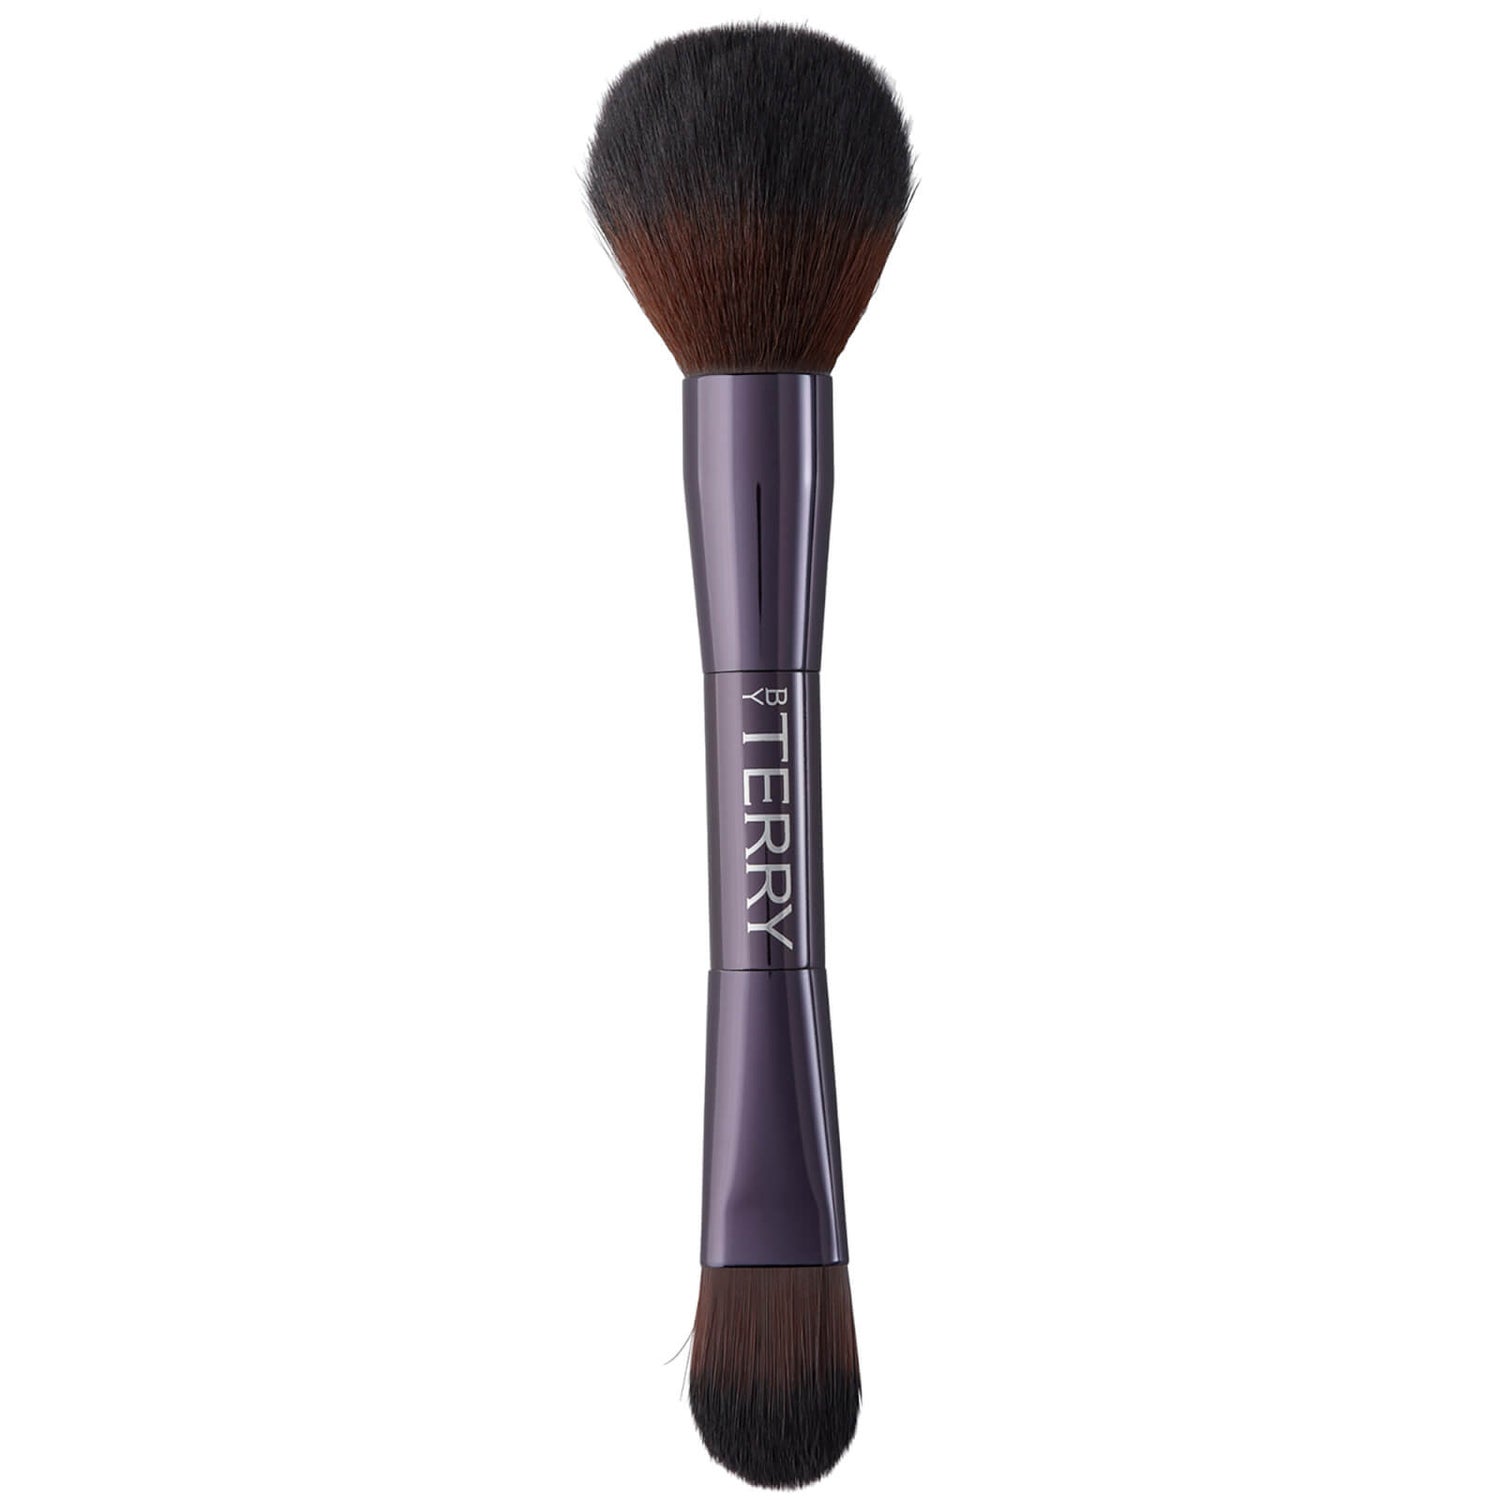 BY TERRY Tool-Expert Dual-Ended Liquid Powder Brush 1 piece